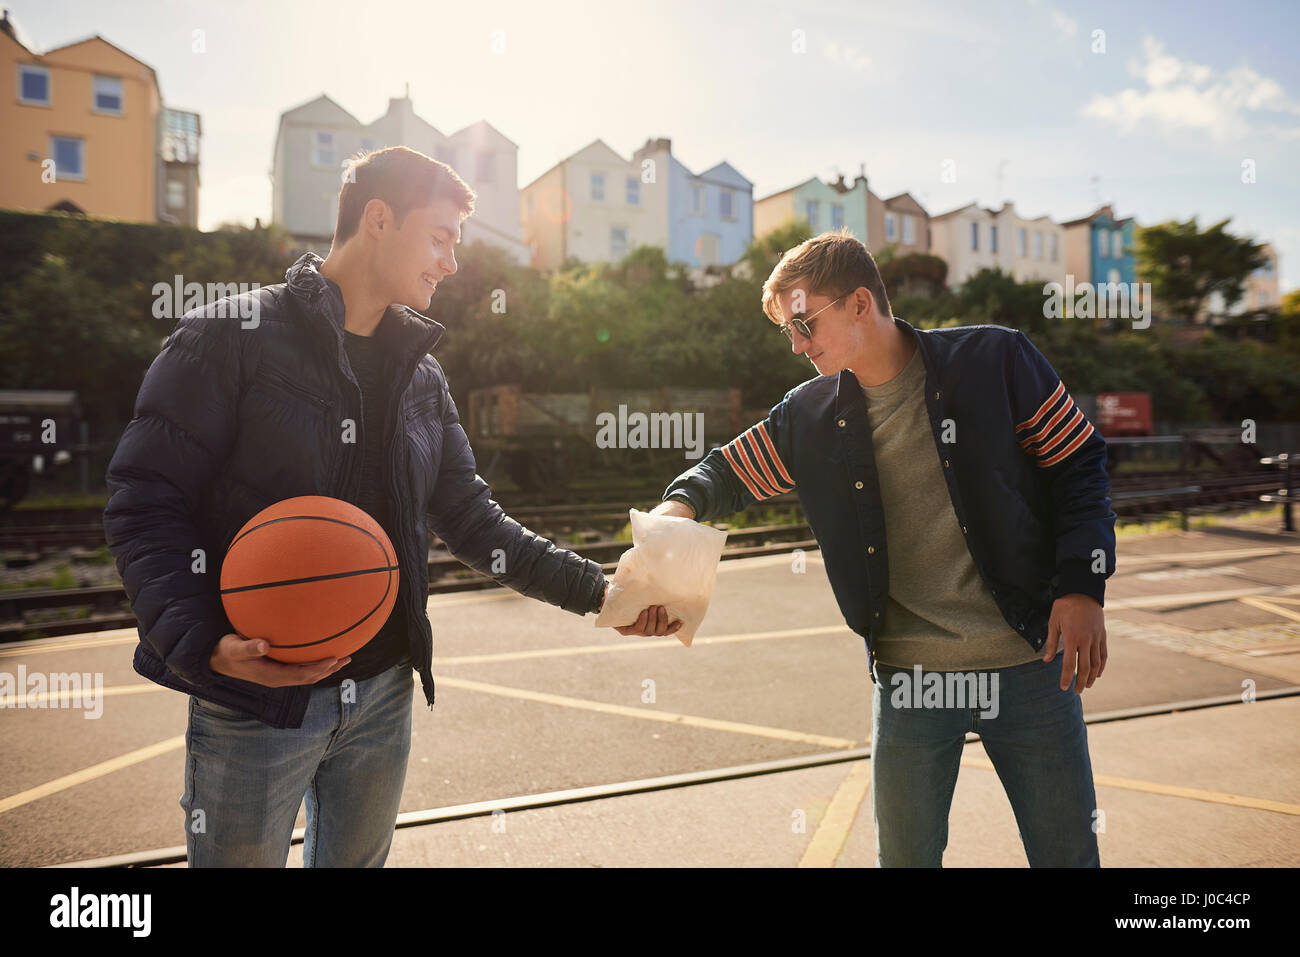 Young man sharing bag of chips with friend, young man holding basketball, Bristol, UK Stock Photo